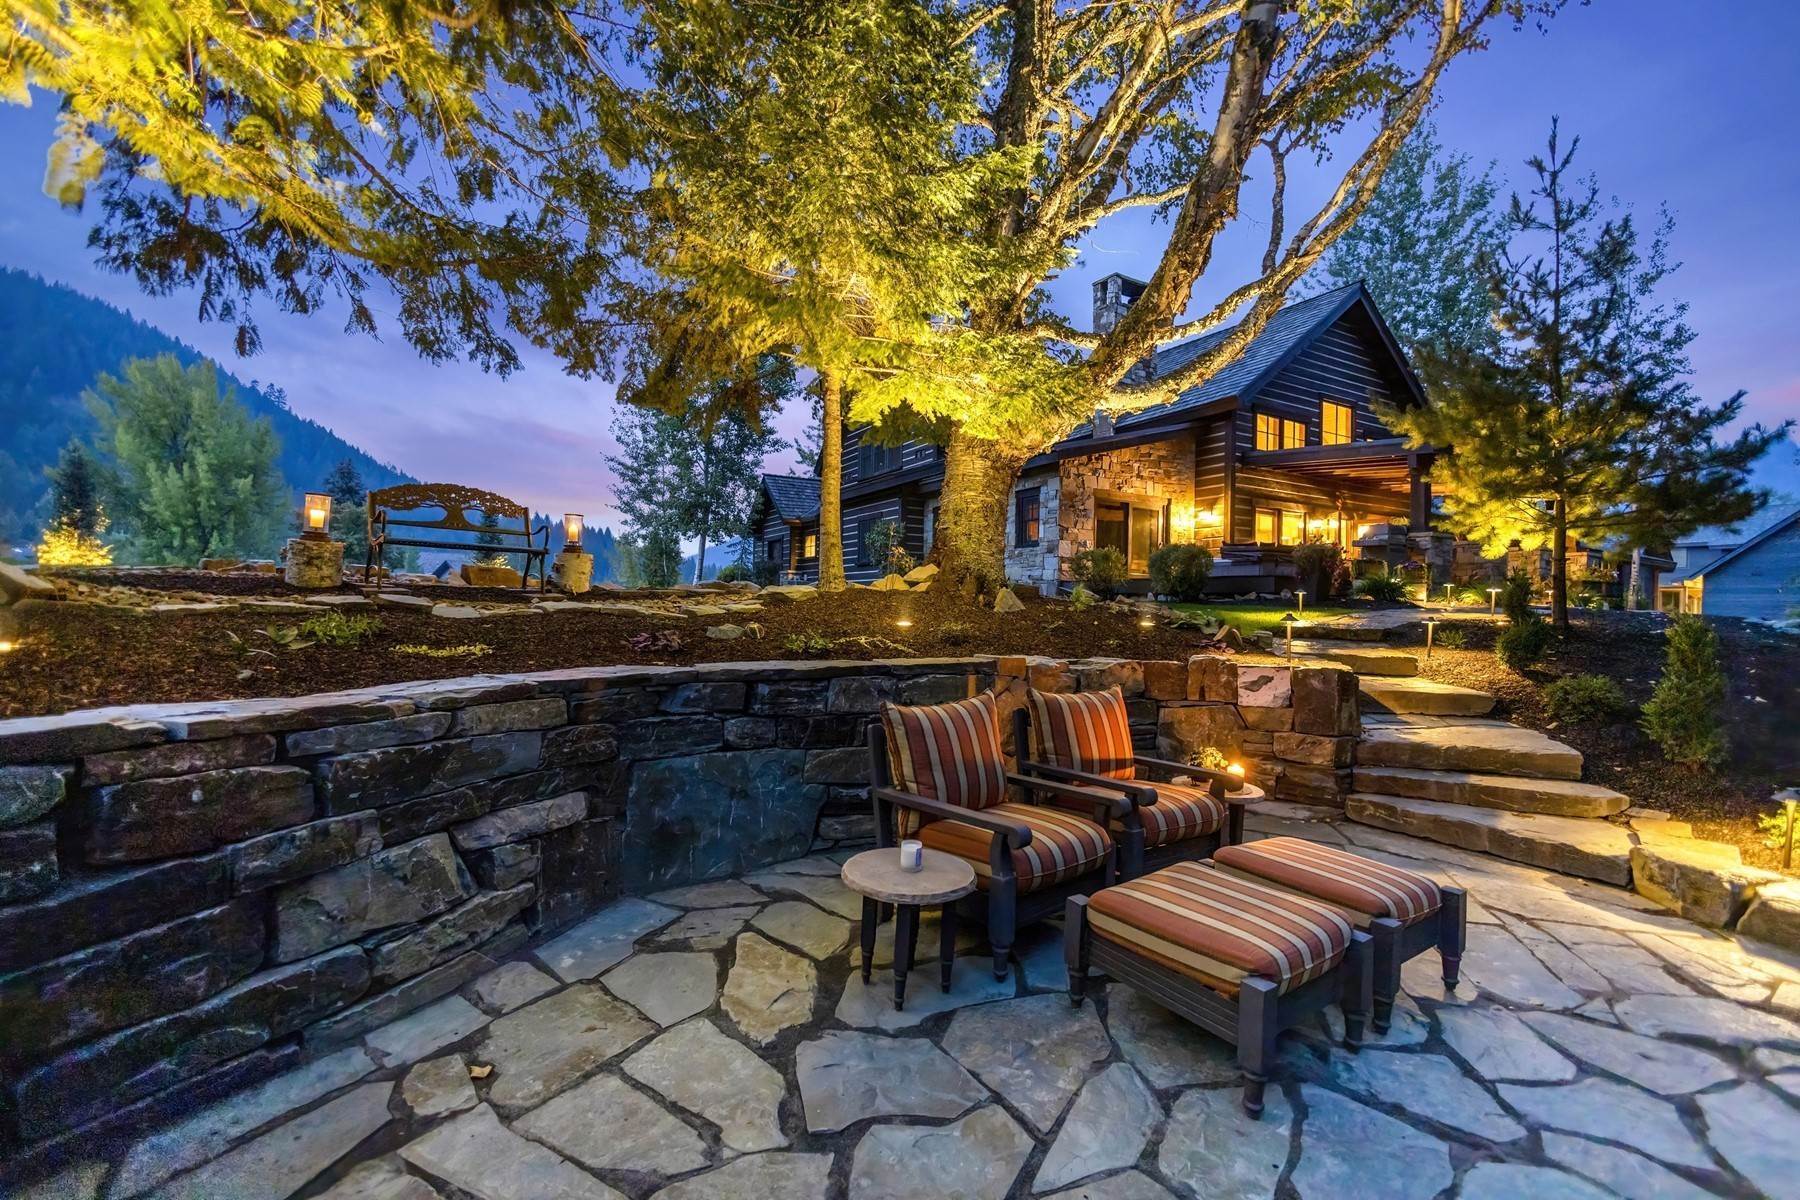 Single Family Homes for Sale at Spectacular Lodge Home -2 Parcels 356 N Idaho Club Sandpoint, Idaho 83864 United States